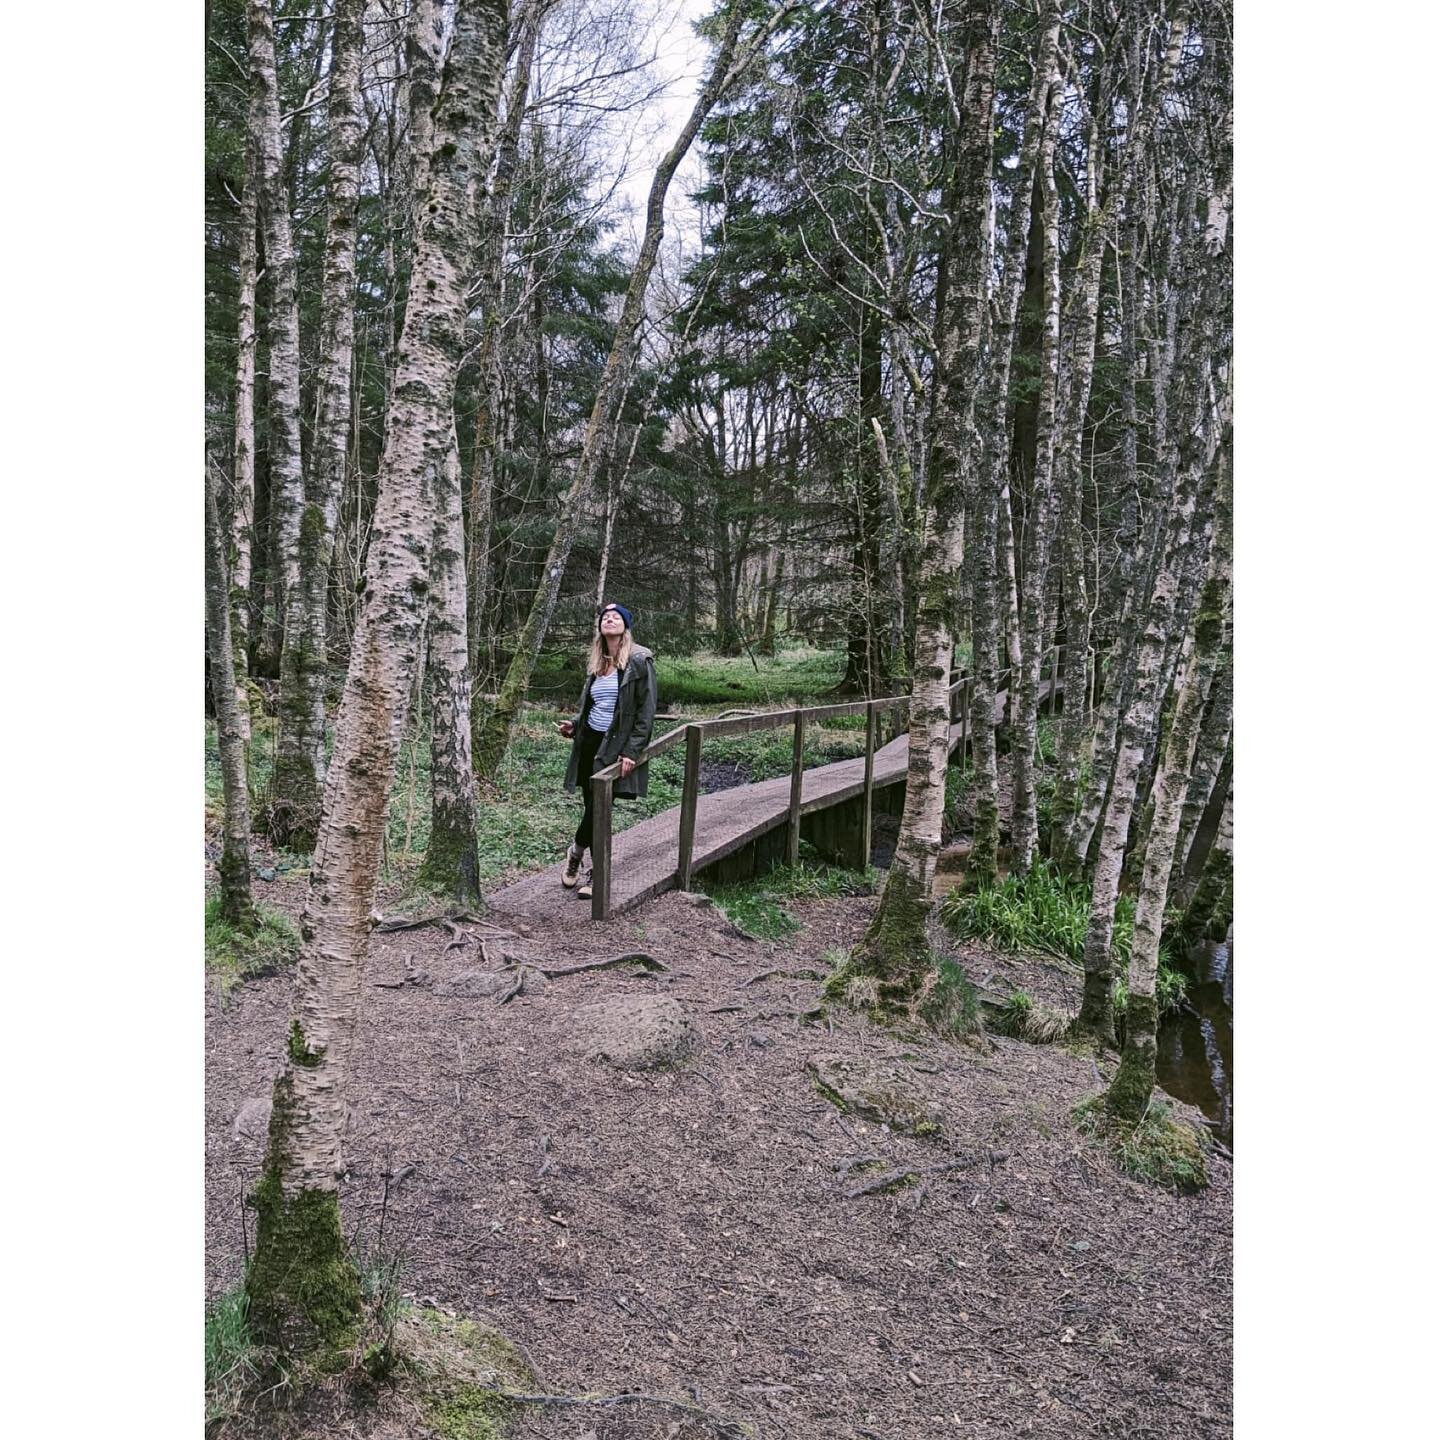 why don&rsquo;t you make like a tree&hellip; and get outta here (for the weekend)🌲🌲 this moment of zen brought to you by the scottish woods:) pc: @delanemorrisonwallace 
.
.
.
.
.
.
#getoutside #nature #momentofzen #naturewalk #birchtree #scotland 